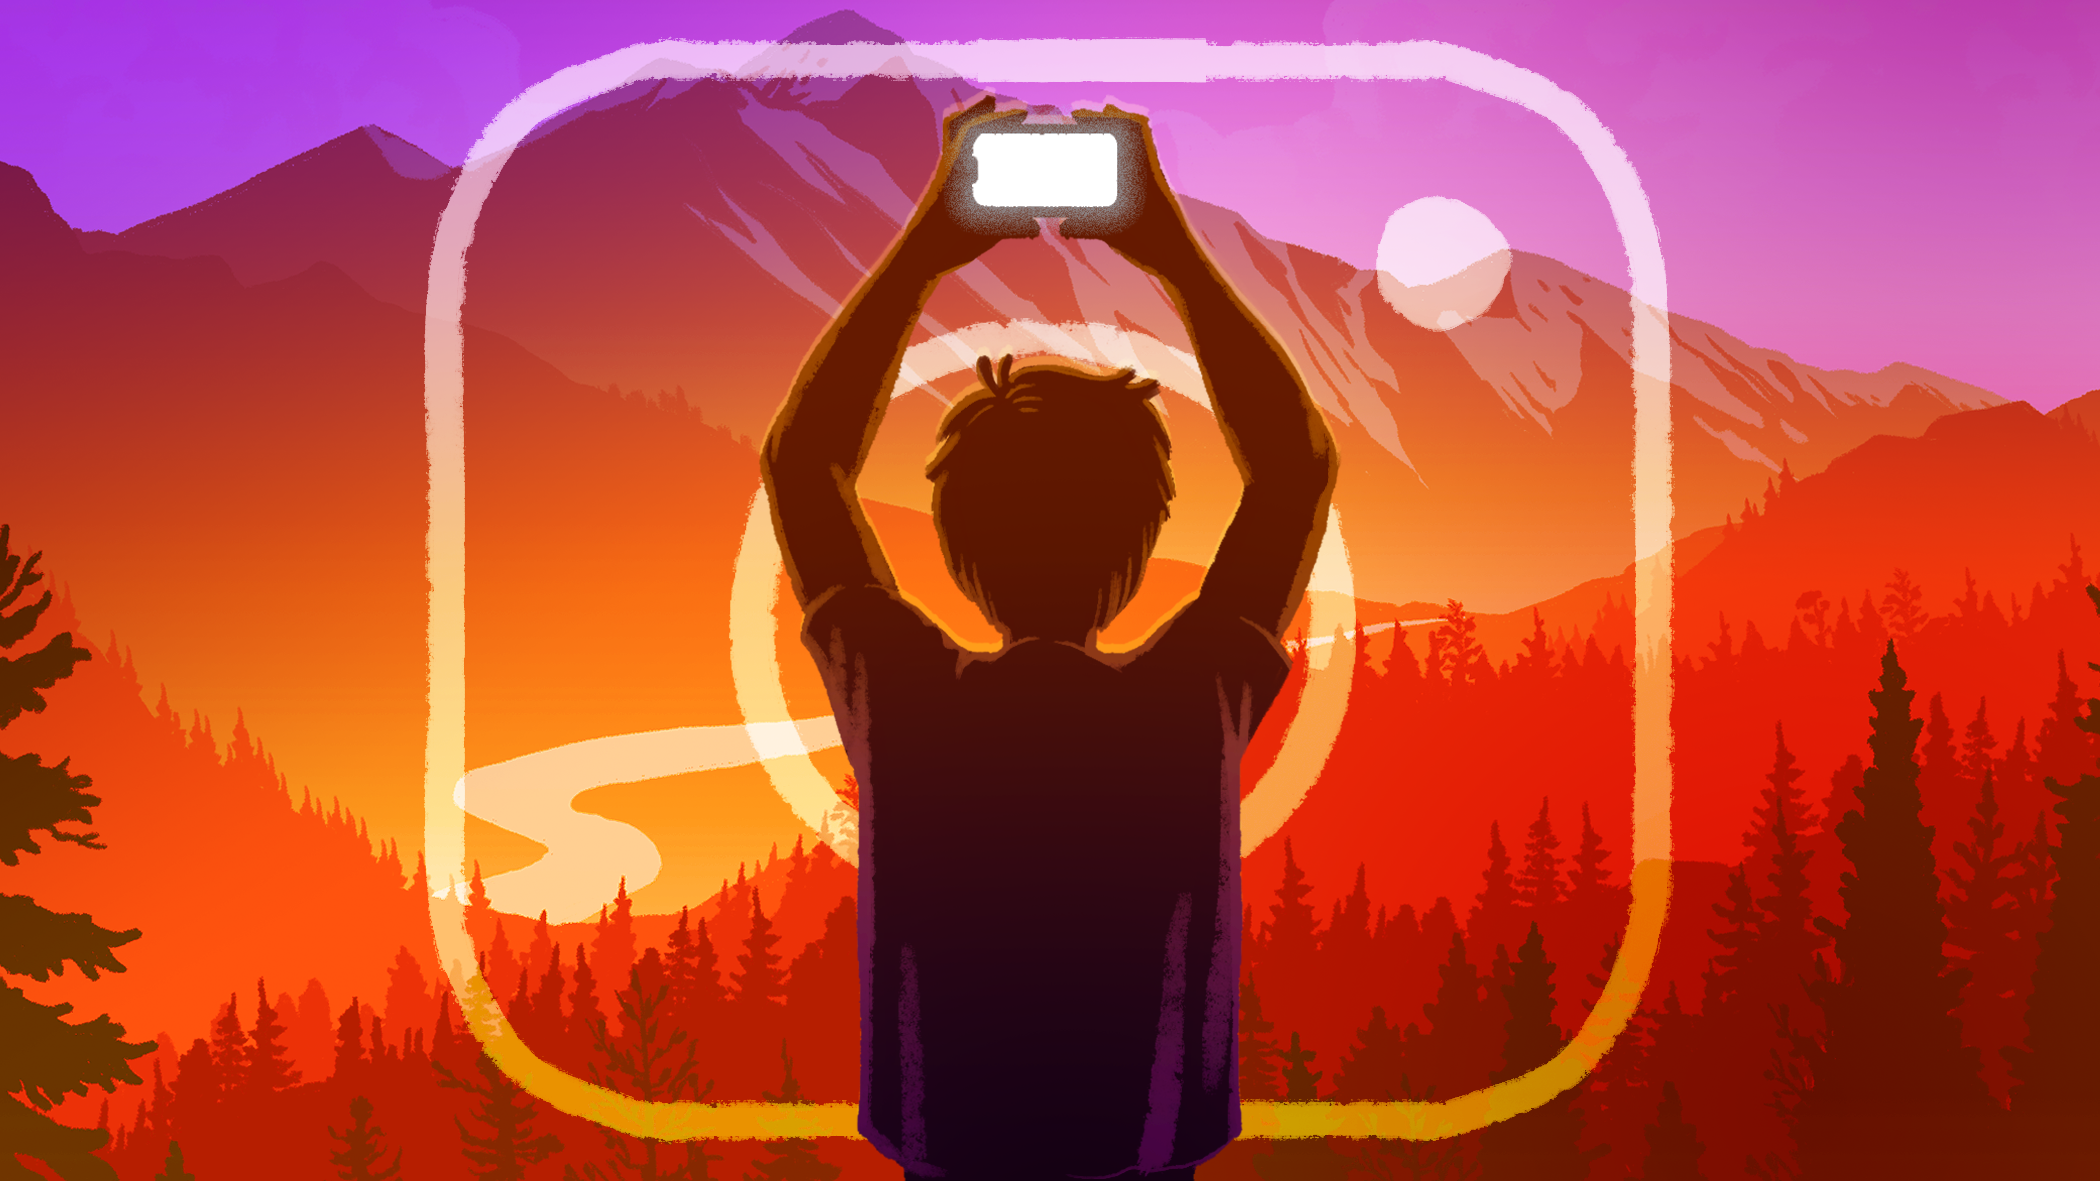 An illustration of a person holding up a phone in front of the Instagram logo.